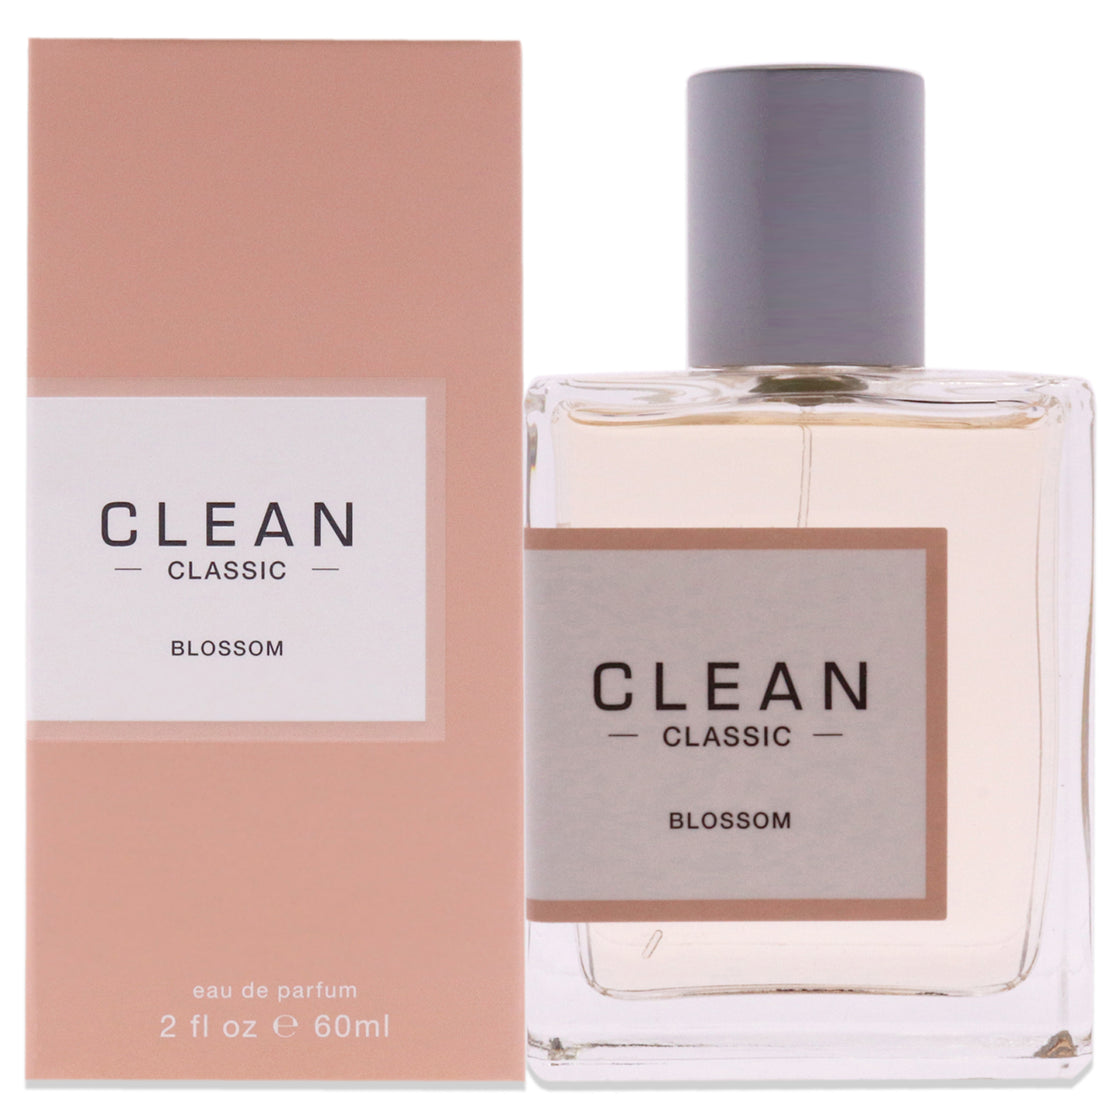 Blossom by Clean for Women - 2 oz EDP Spray